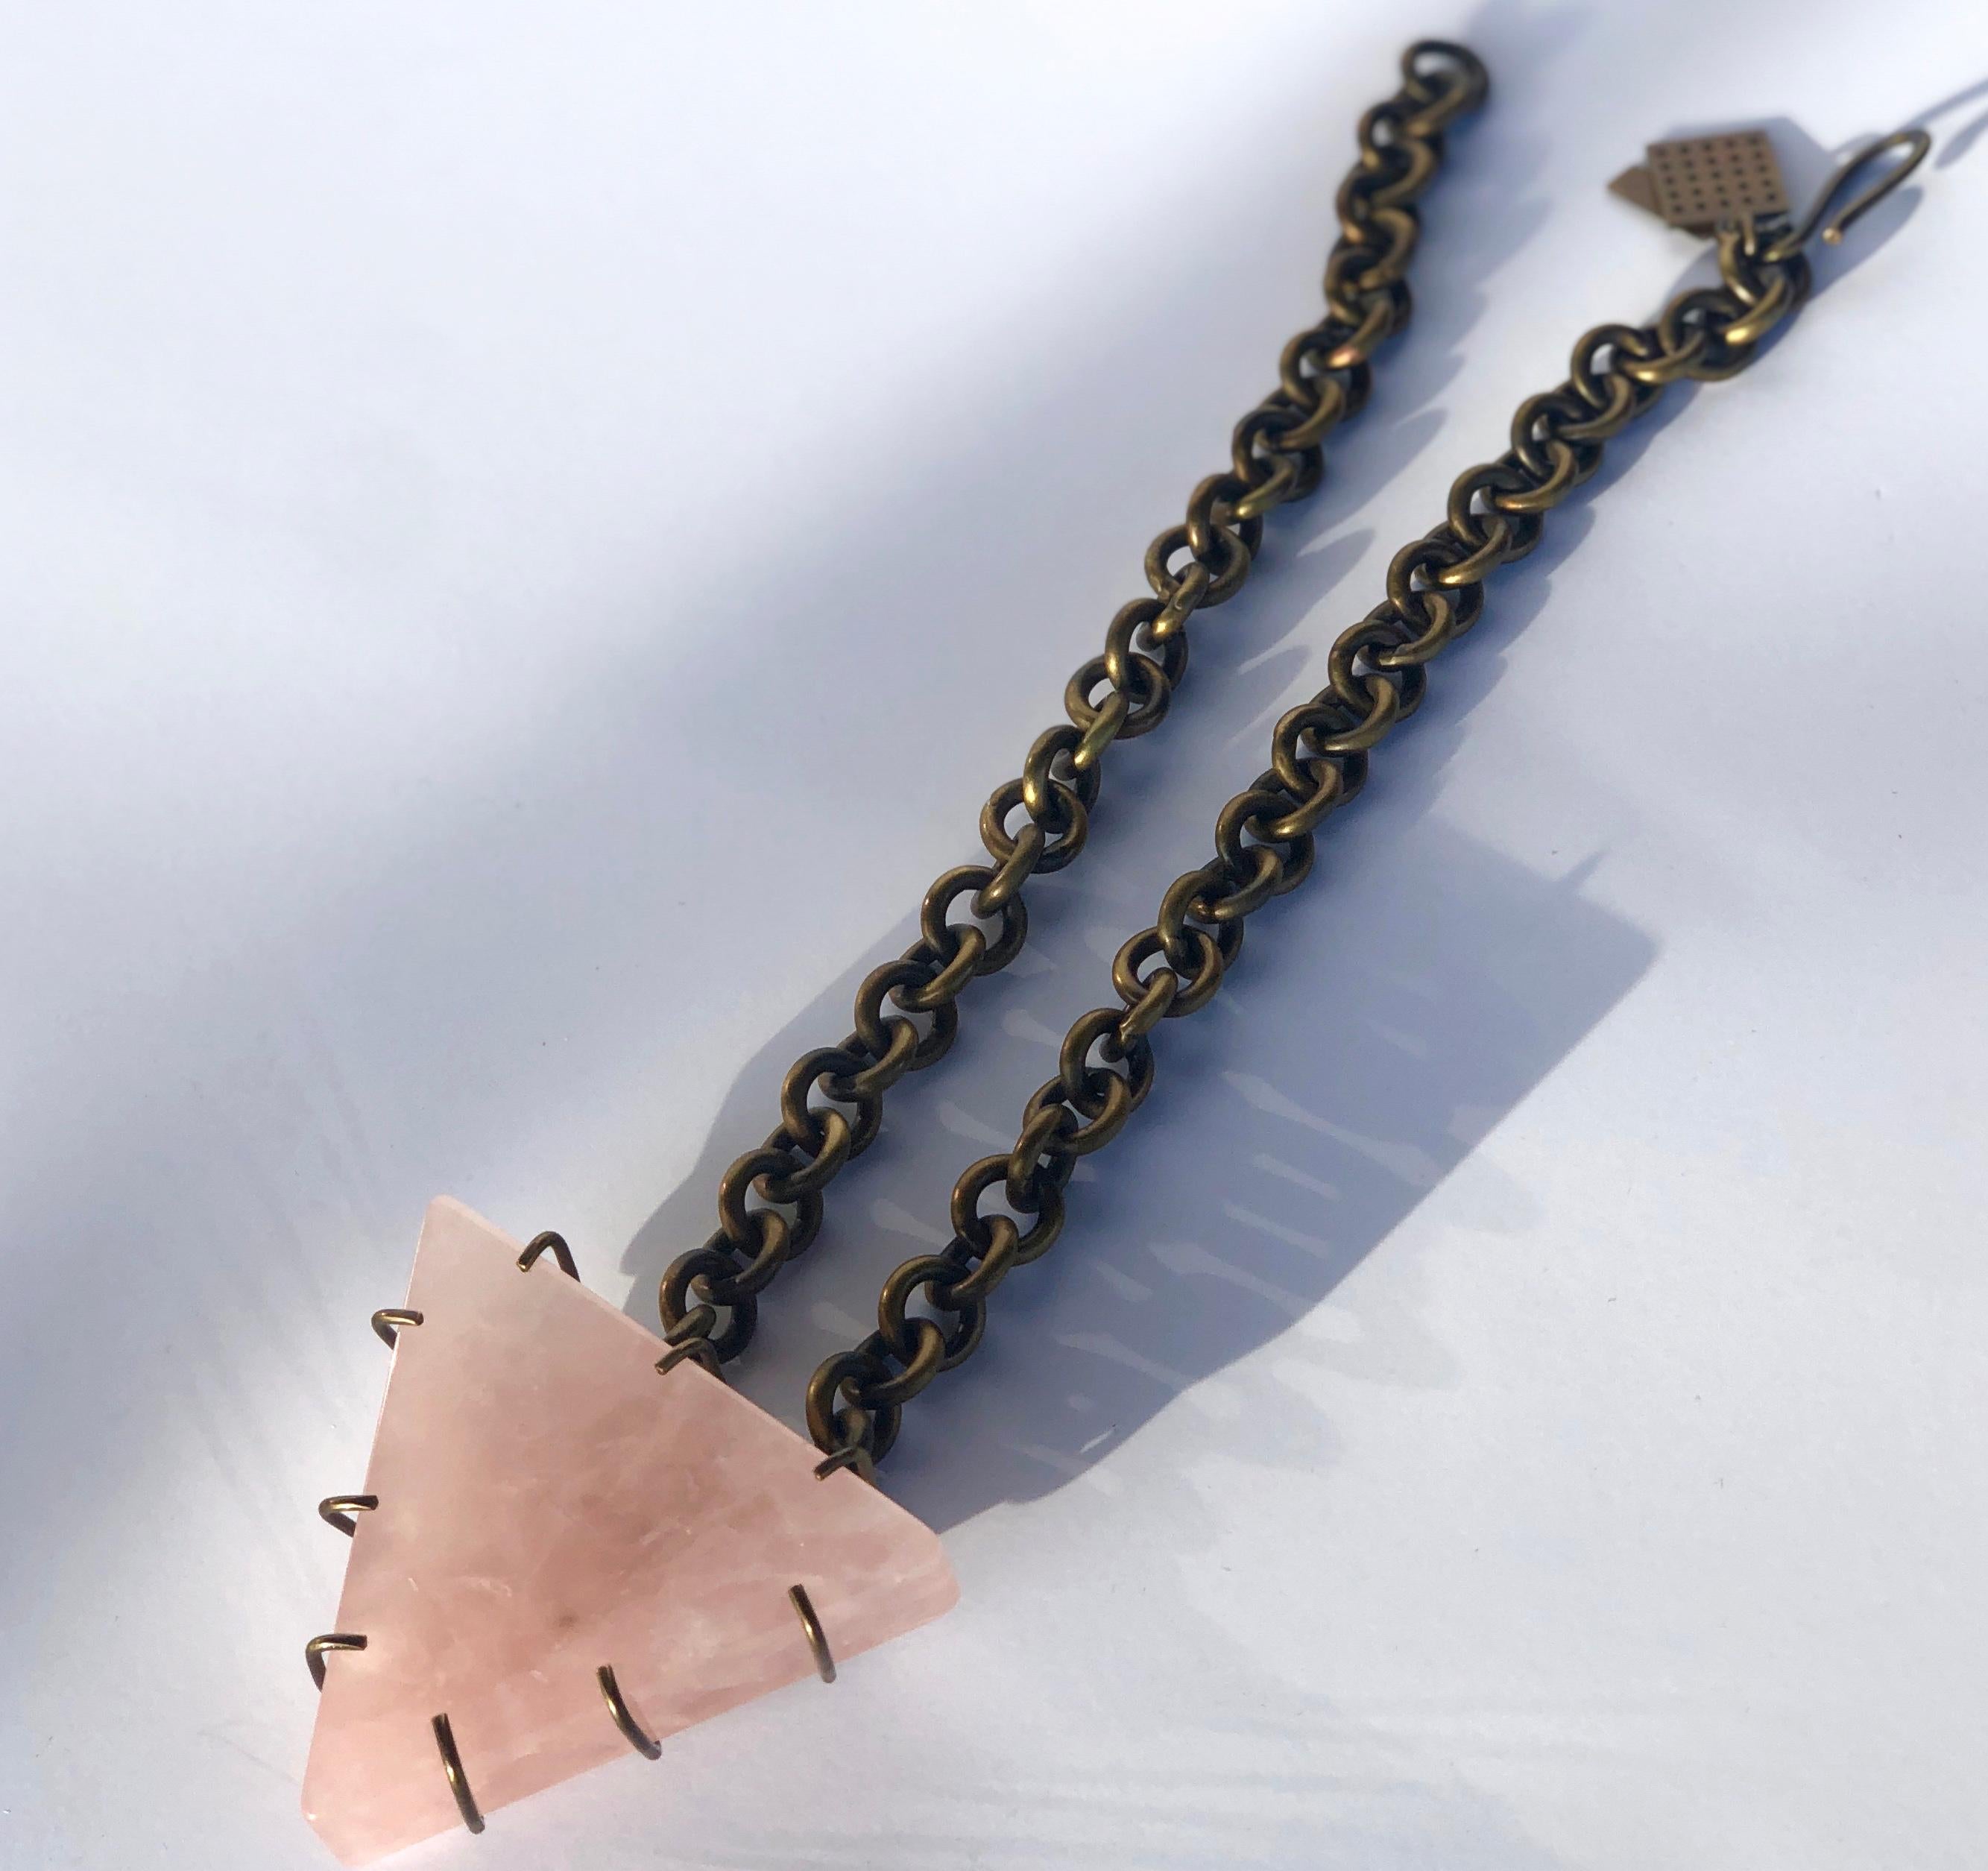 Offered is a signed Kelly Wearstler triangular large pink quartz pendent held by bronze prongs and bronze chain link necklace.
Make:  Kelly Wearstler
Place of manufacture:  United States
Color:  Pink and bronze
Materials:  Pink quartz and